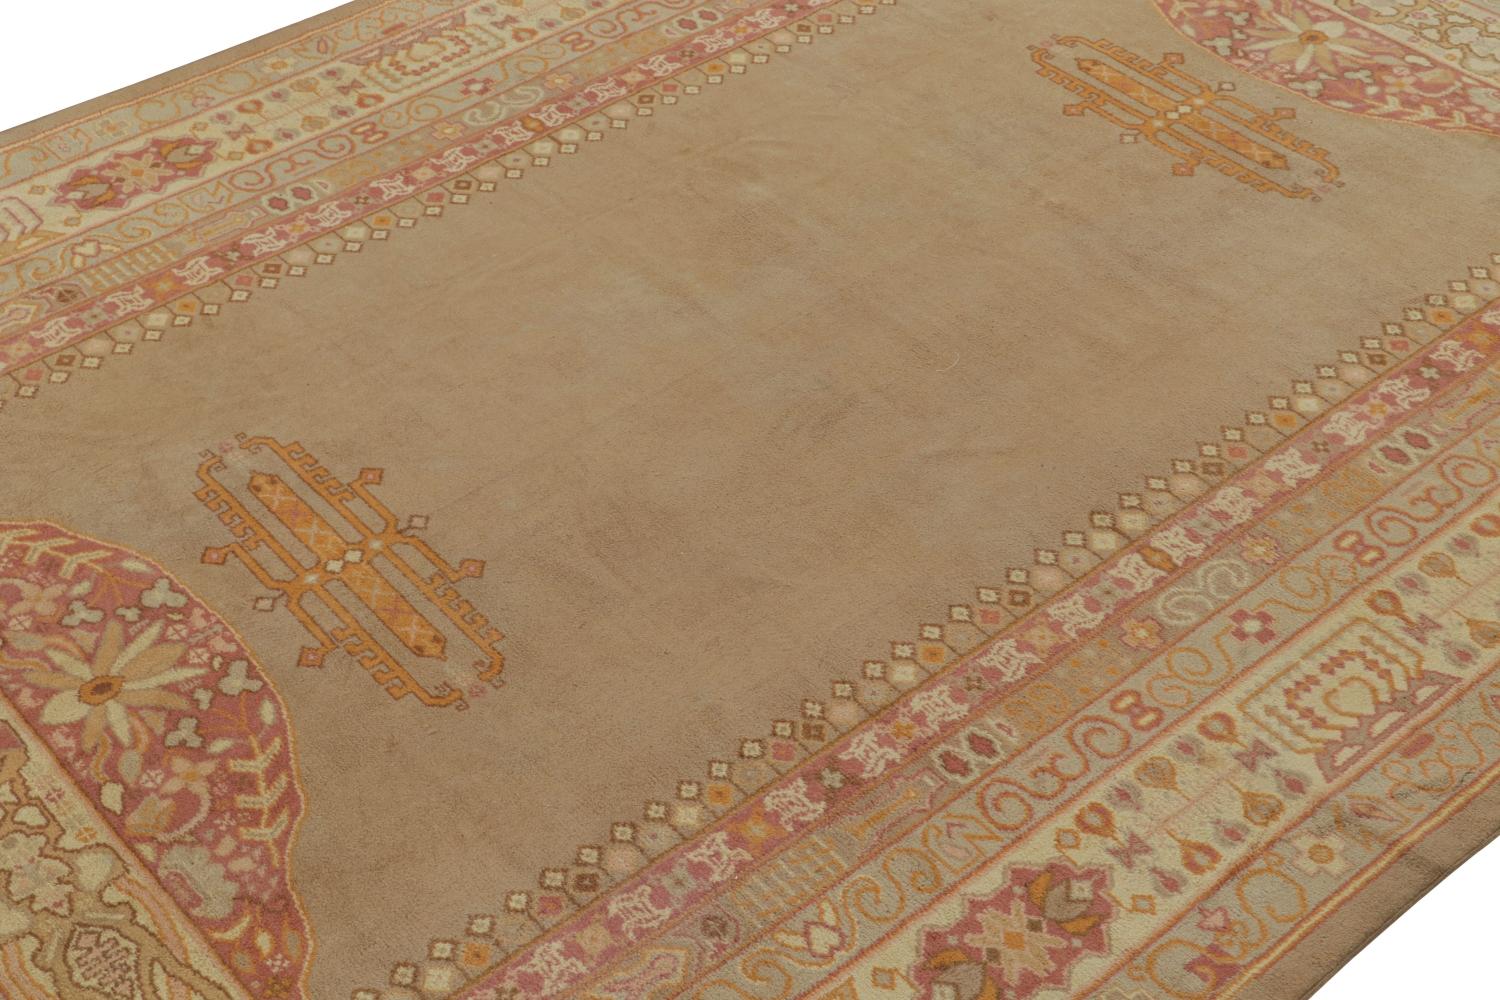 This antique 9x13 rug is a rare acquisition from the new unveilings in Rug & Kilim’s Antique & Vintage Collection. 

On the Design: 

Hand-knotted in wool circa 1910-1920, this rug looks to be inspired by Egyptian architectural sensibilities in